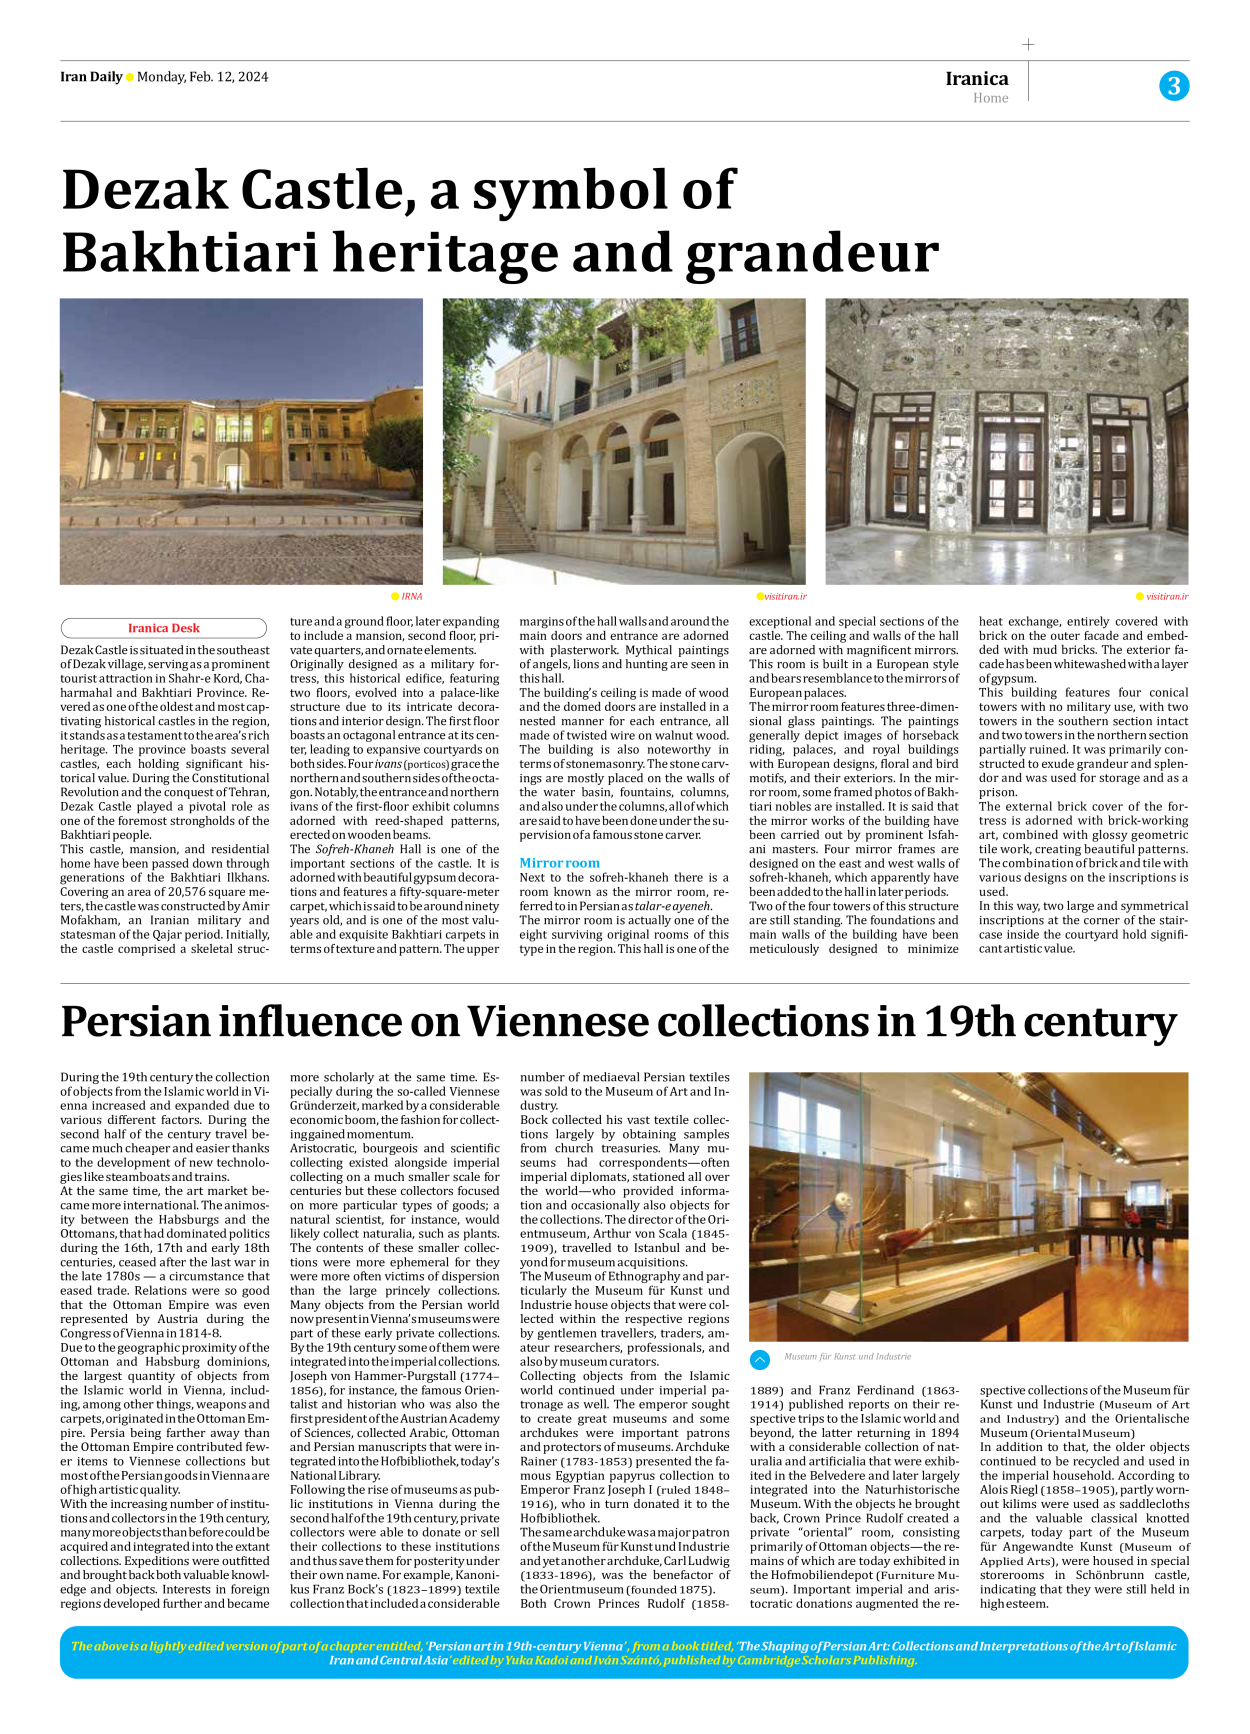 Iran Daily - Number Seven Thousand Five Hundred and Five - 12 February 2024 - Page 3